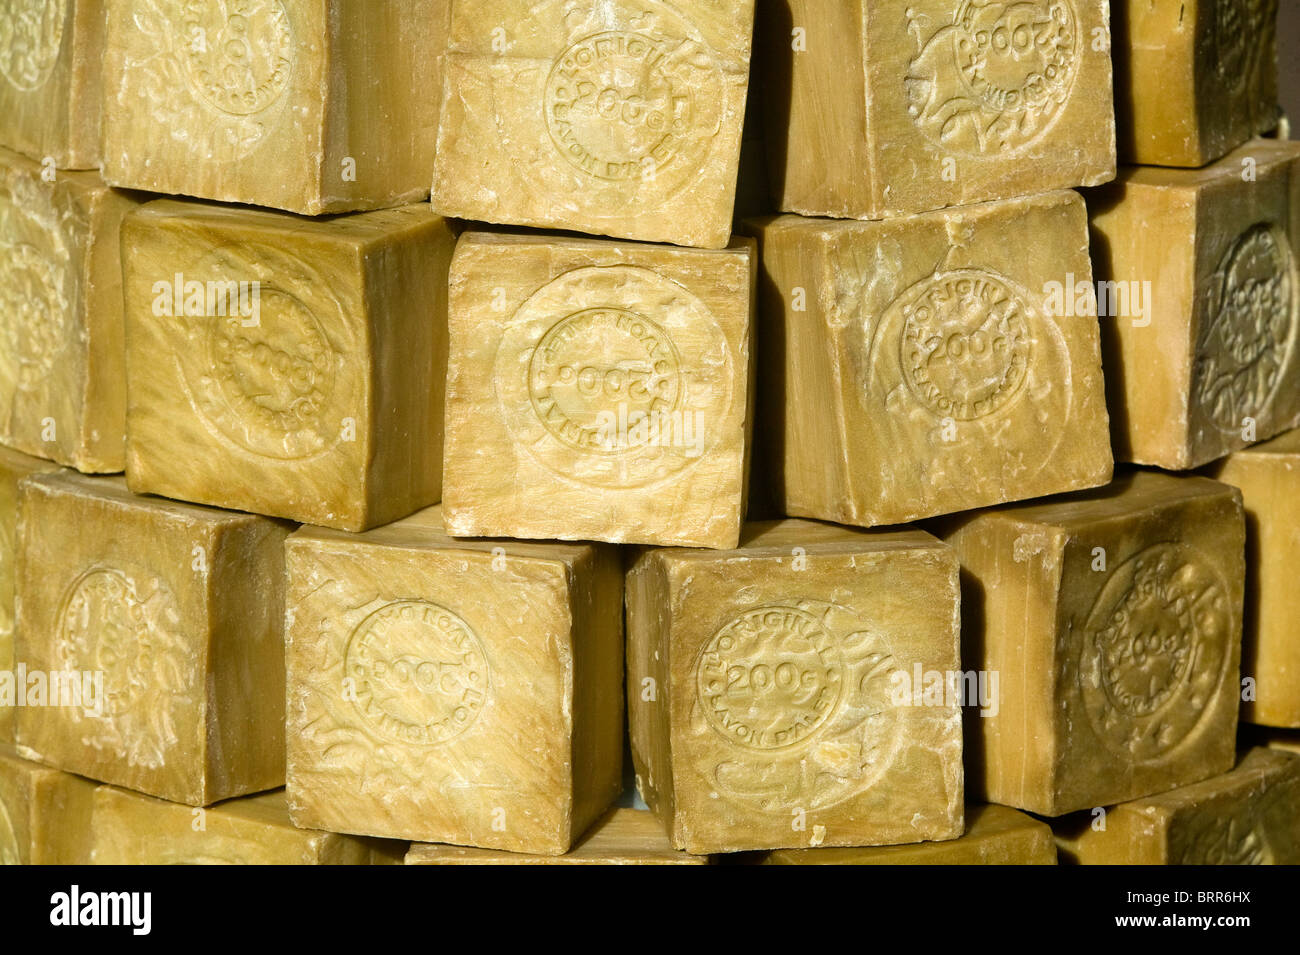 TRADITIONAL SOAP OF ALEP Stock Photo